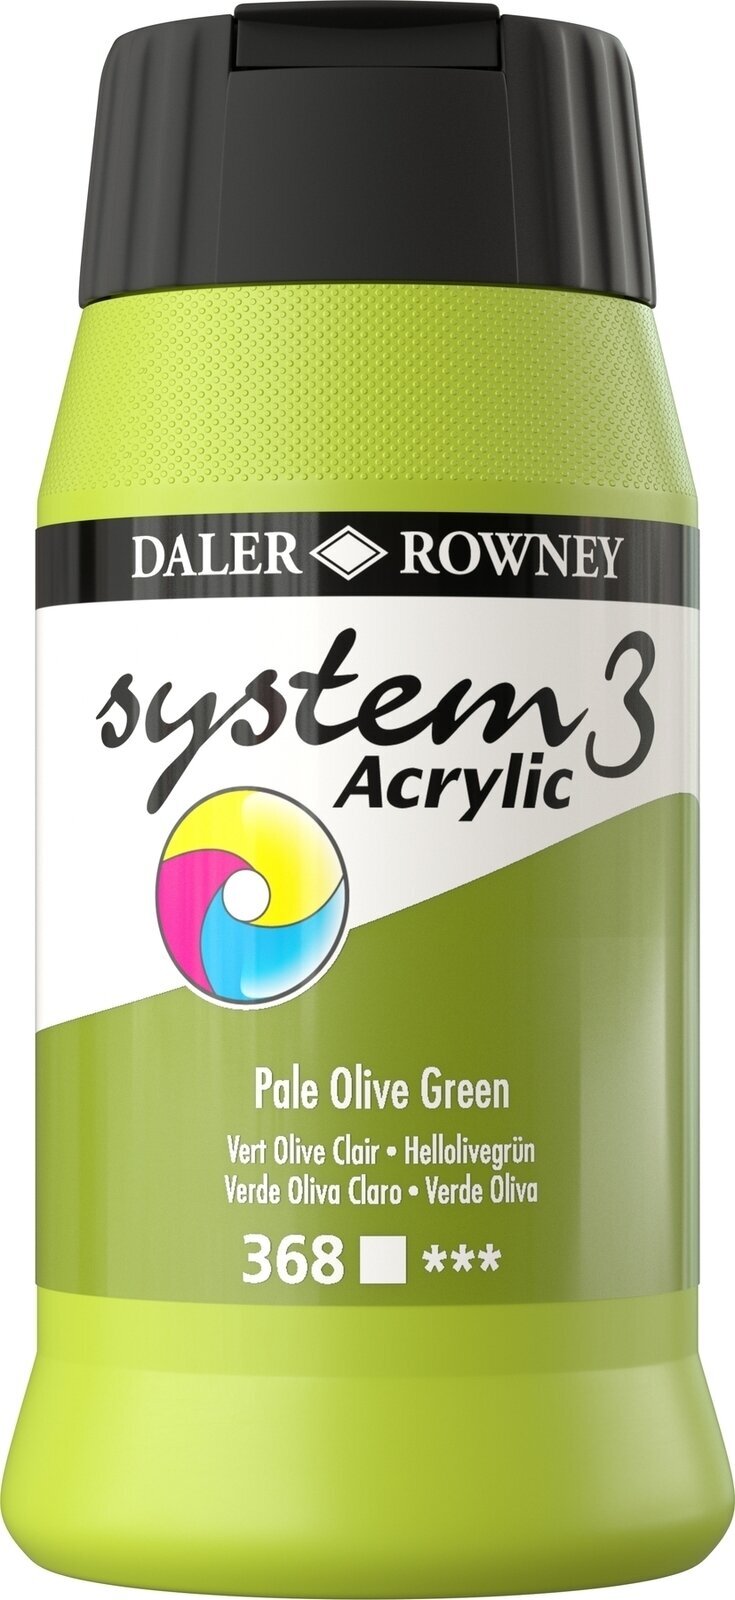 Acrylic Paint Daler Rowney System3 Acrylic Paint Pale Olive Green 500 ml 1 pc